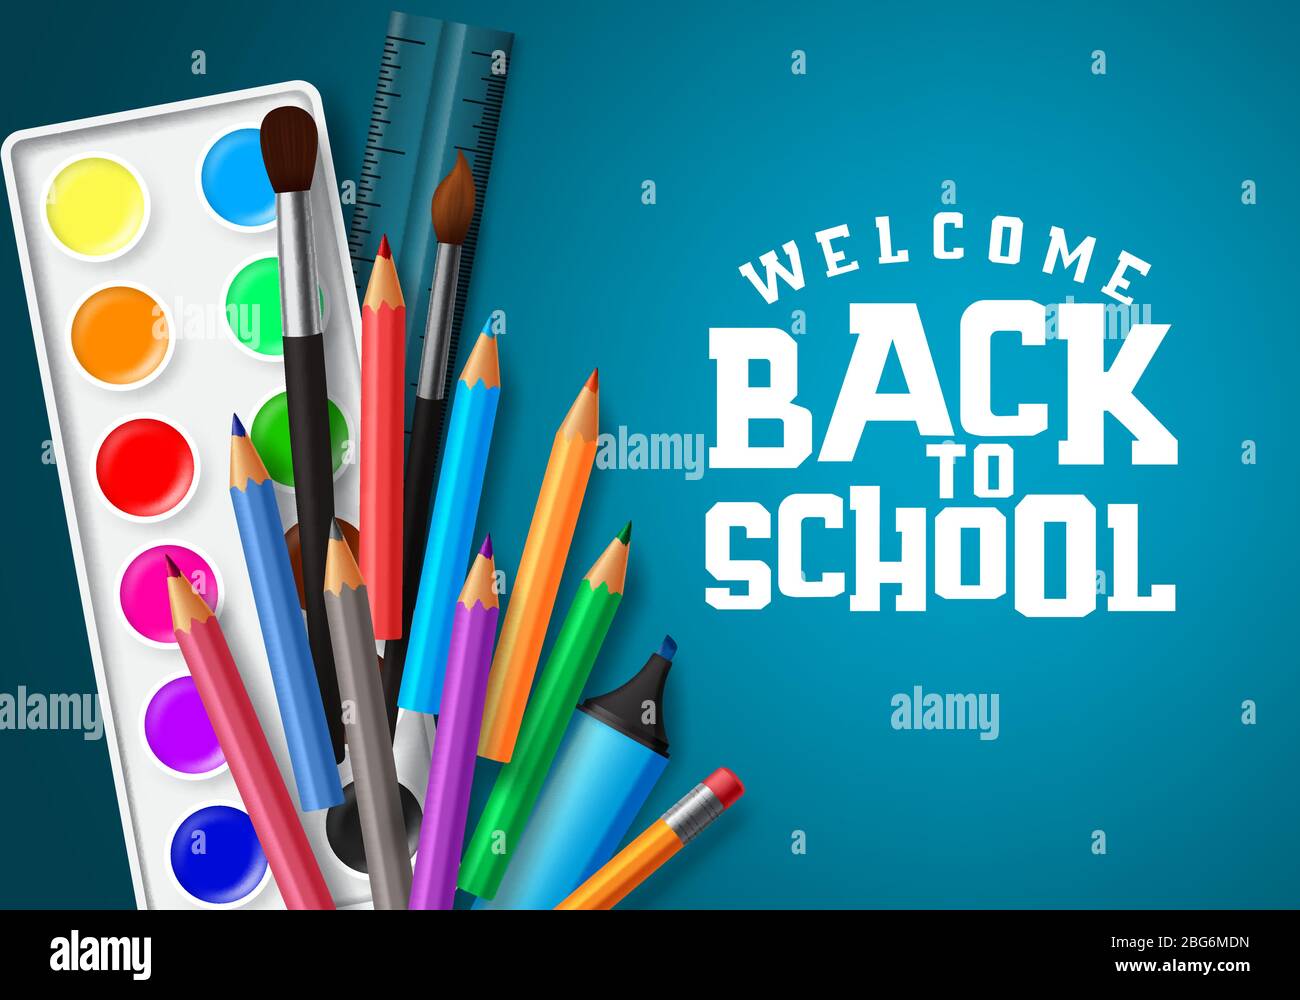 welcome back backgrounds